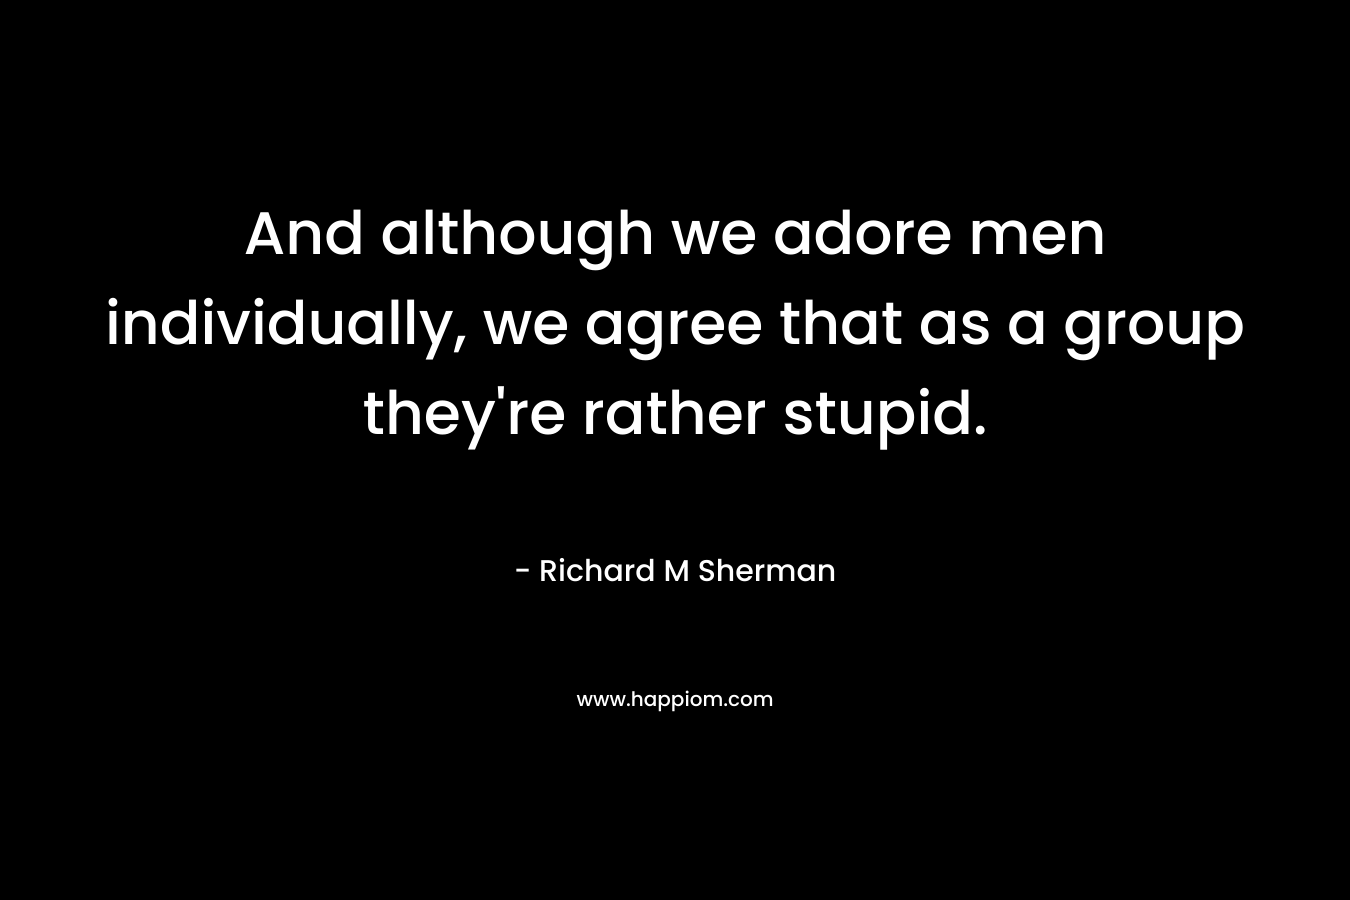 And although we adore men individually, we agree that as a group they’re rather stupid. – Richard M Sherman